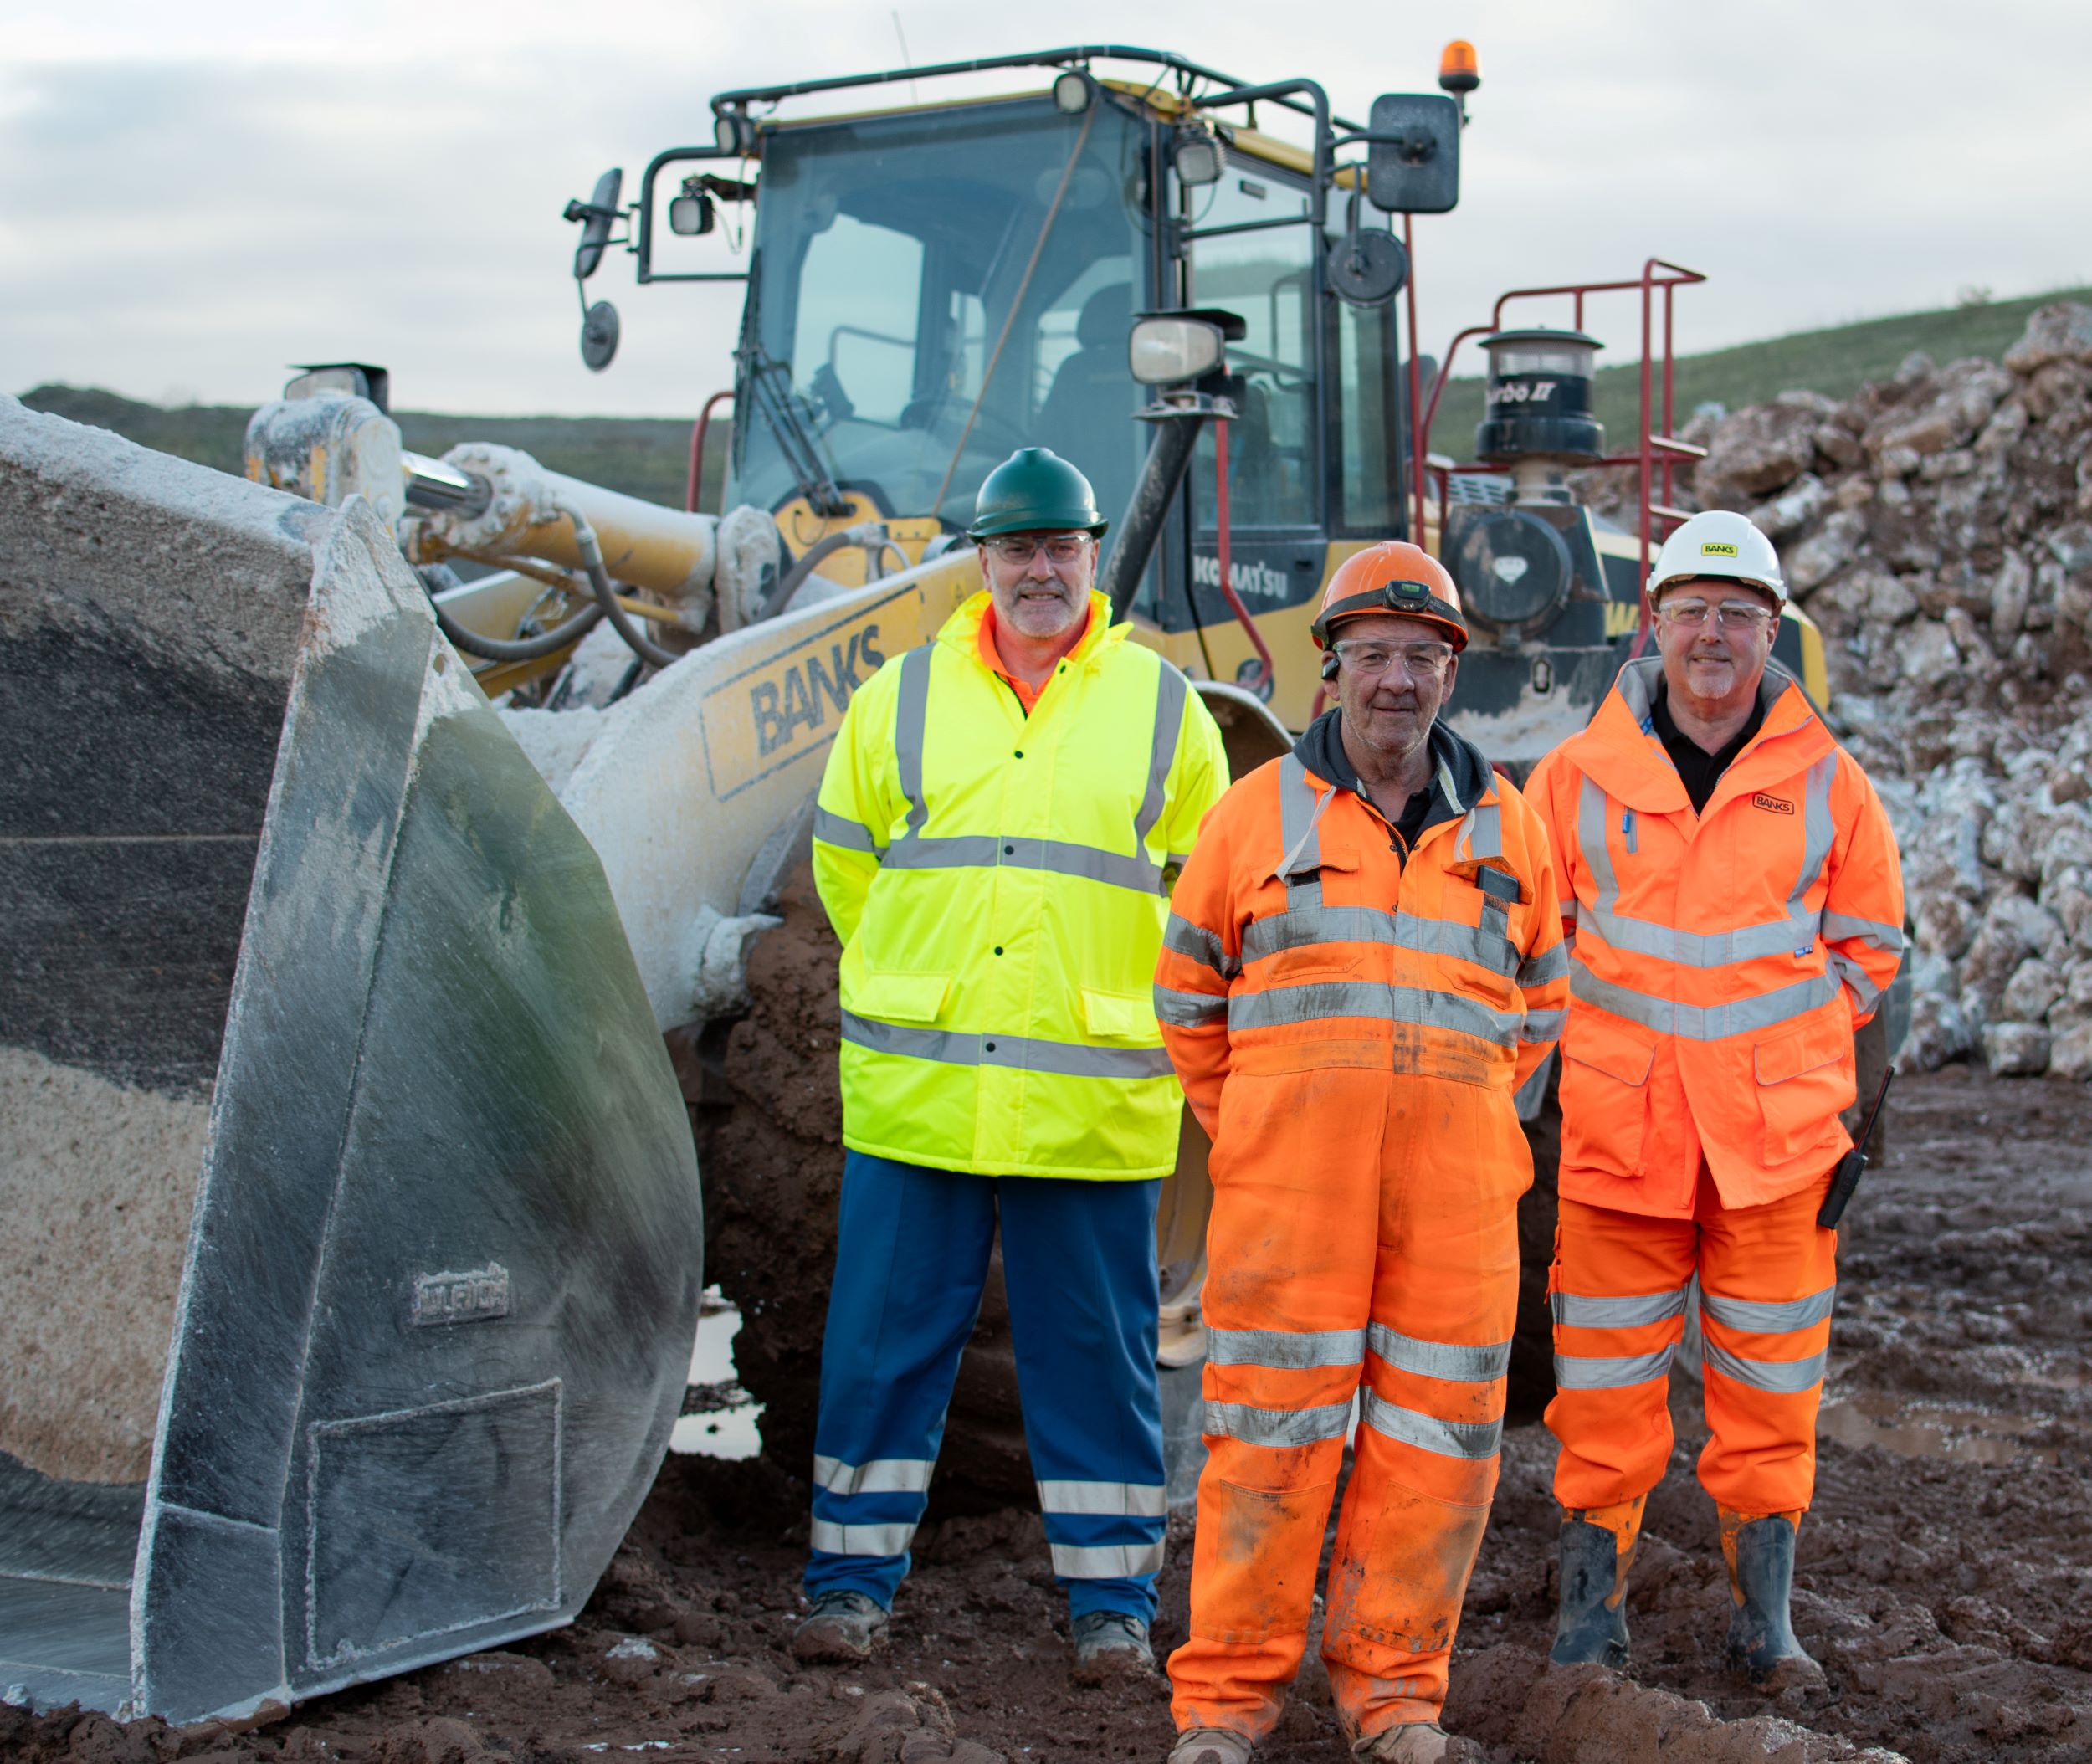 (from left) Kevin Glasper of Saint-Gobain Formula with Bert Emson and Neil Cook of Banks Mining